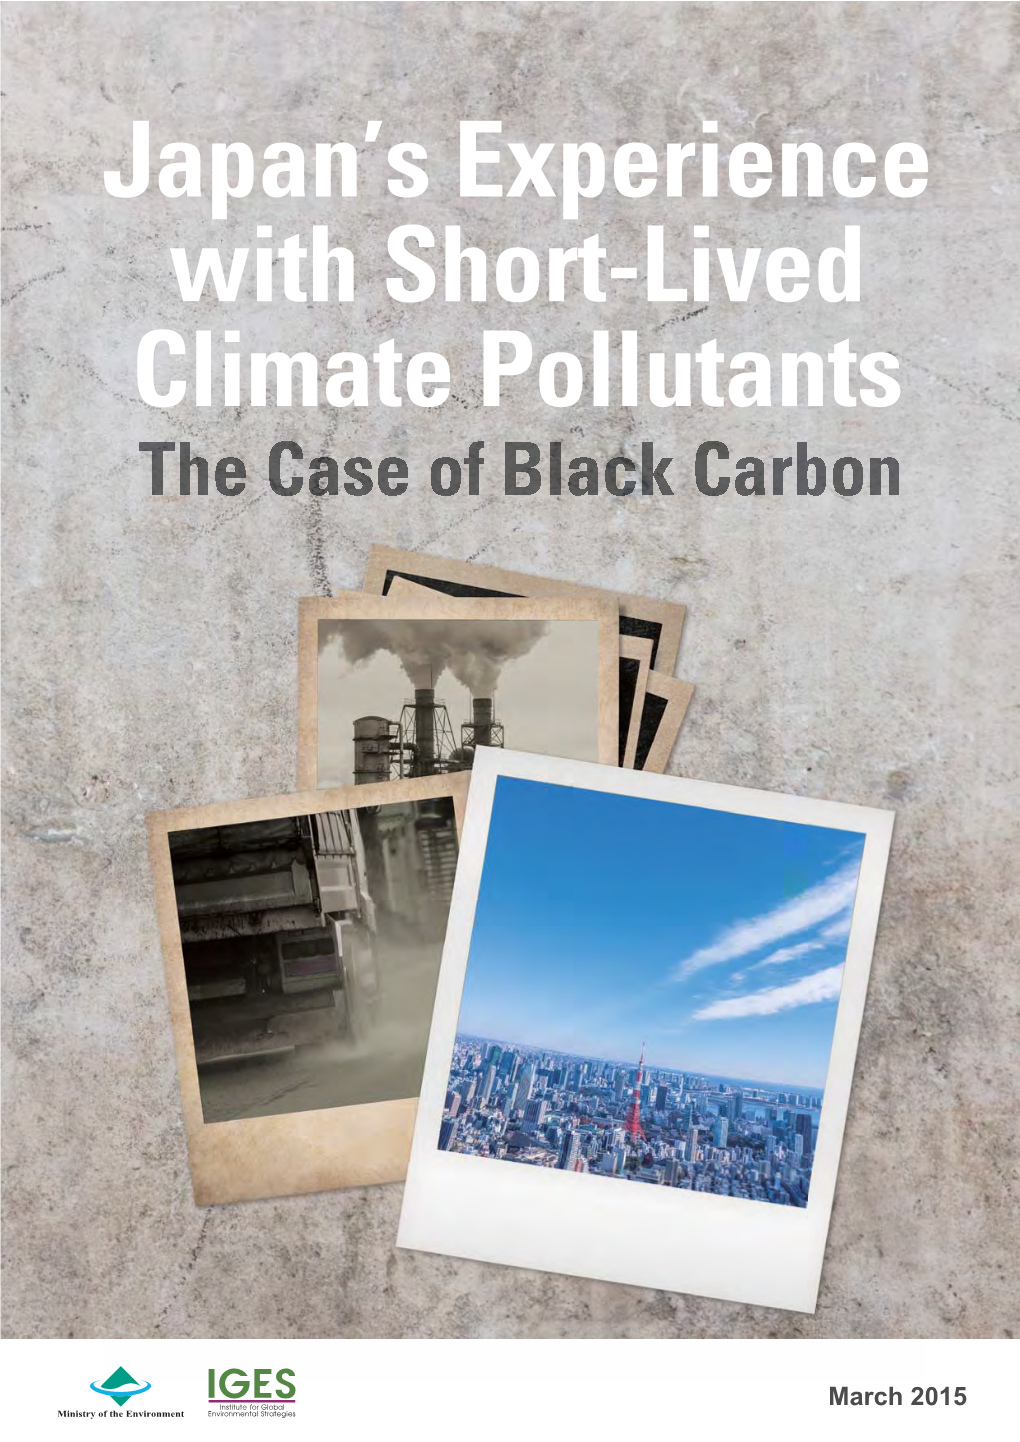 Japan's Experience with Short-Lived Climate Pollutants: the Case of Black Carbon